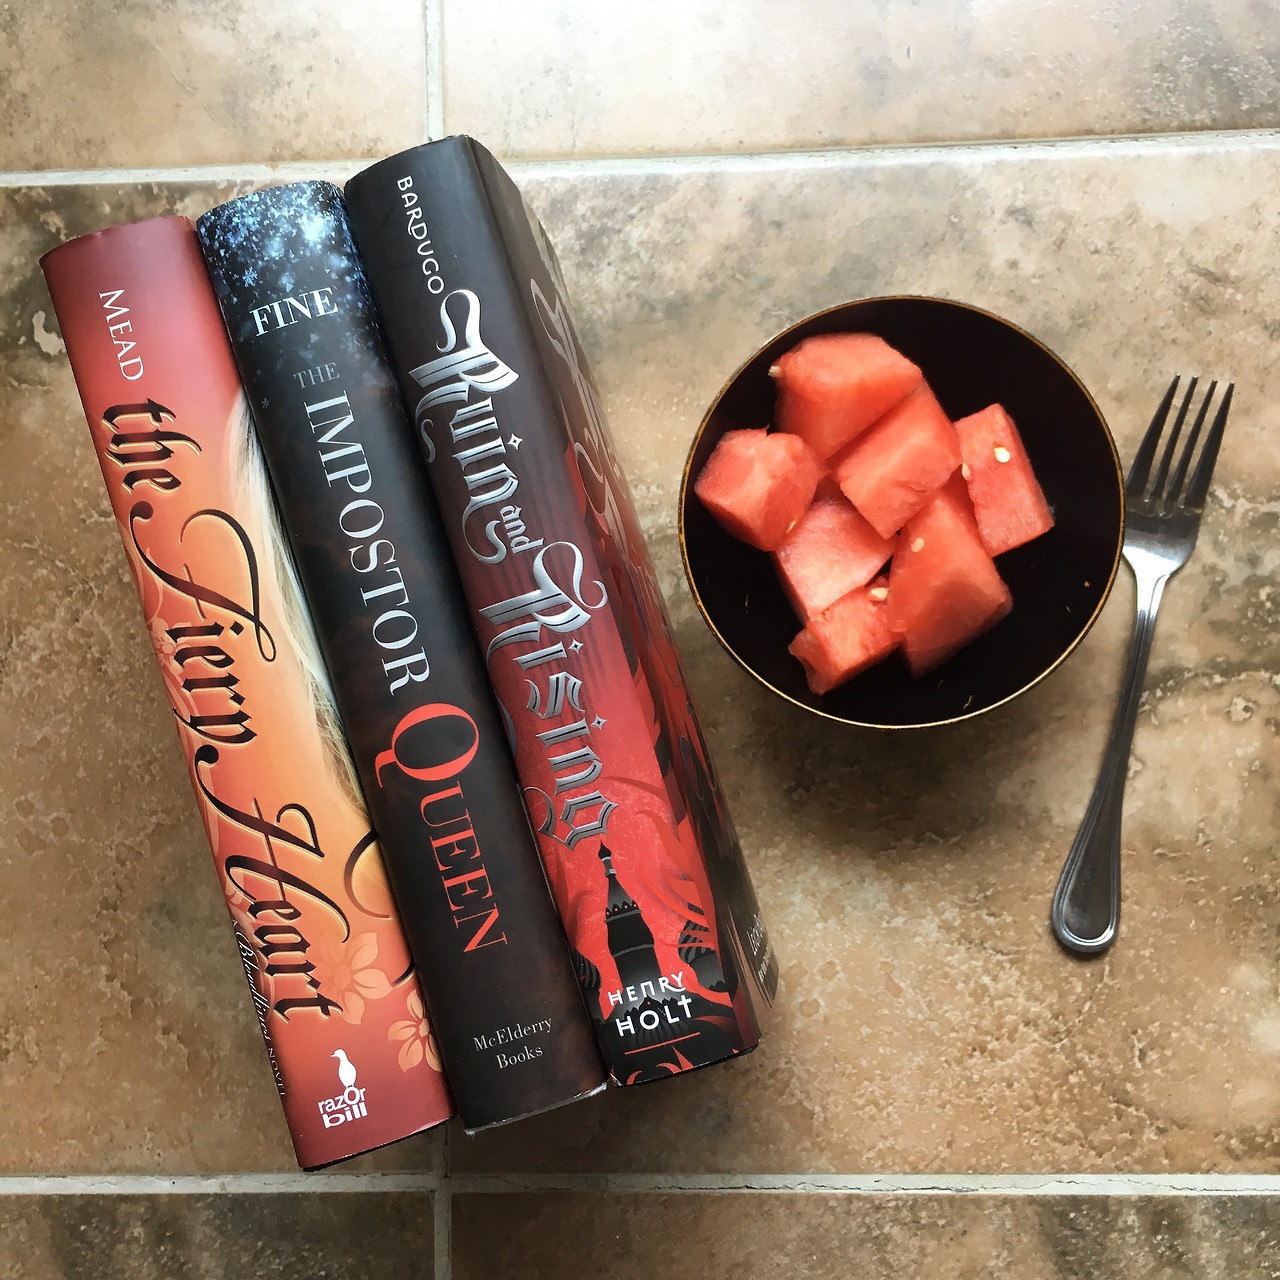 bookaddict24-7:
“ Day 16 of August Maiden Book Photo Challenge: Book Spine Beauty
I love this theme of red and watermelon is so stinking refreshing during the summer!
(Instagram)
”